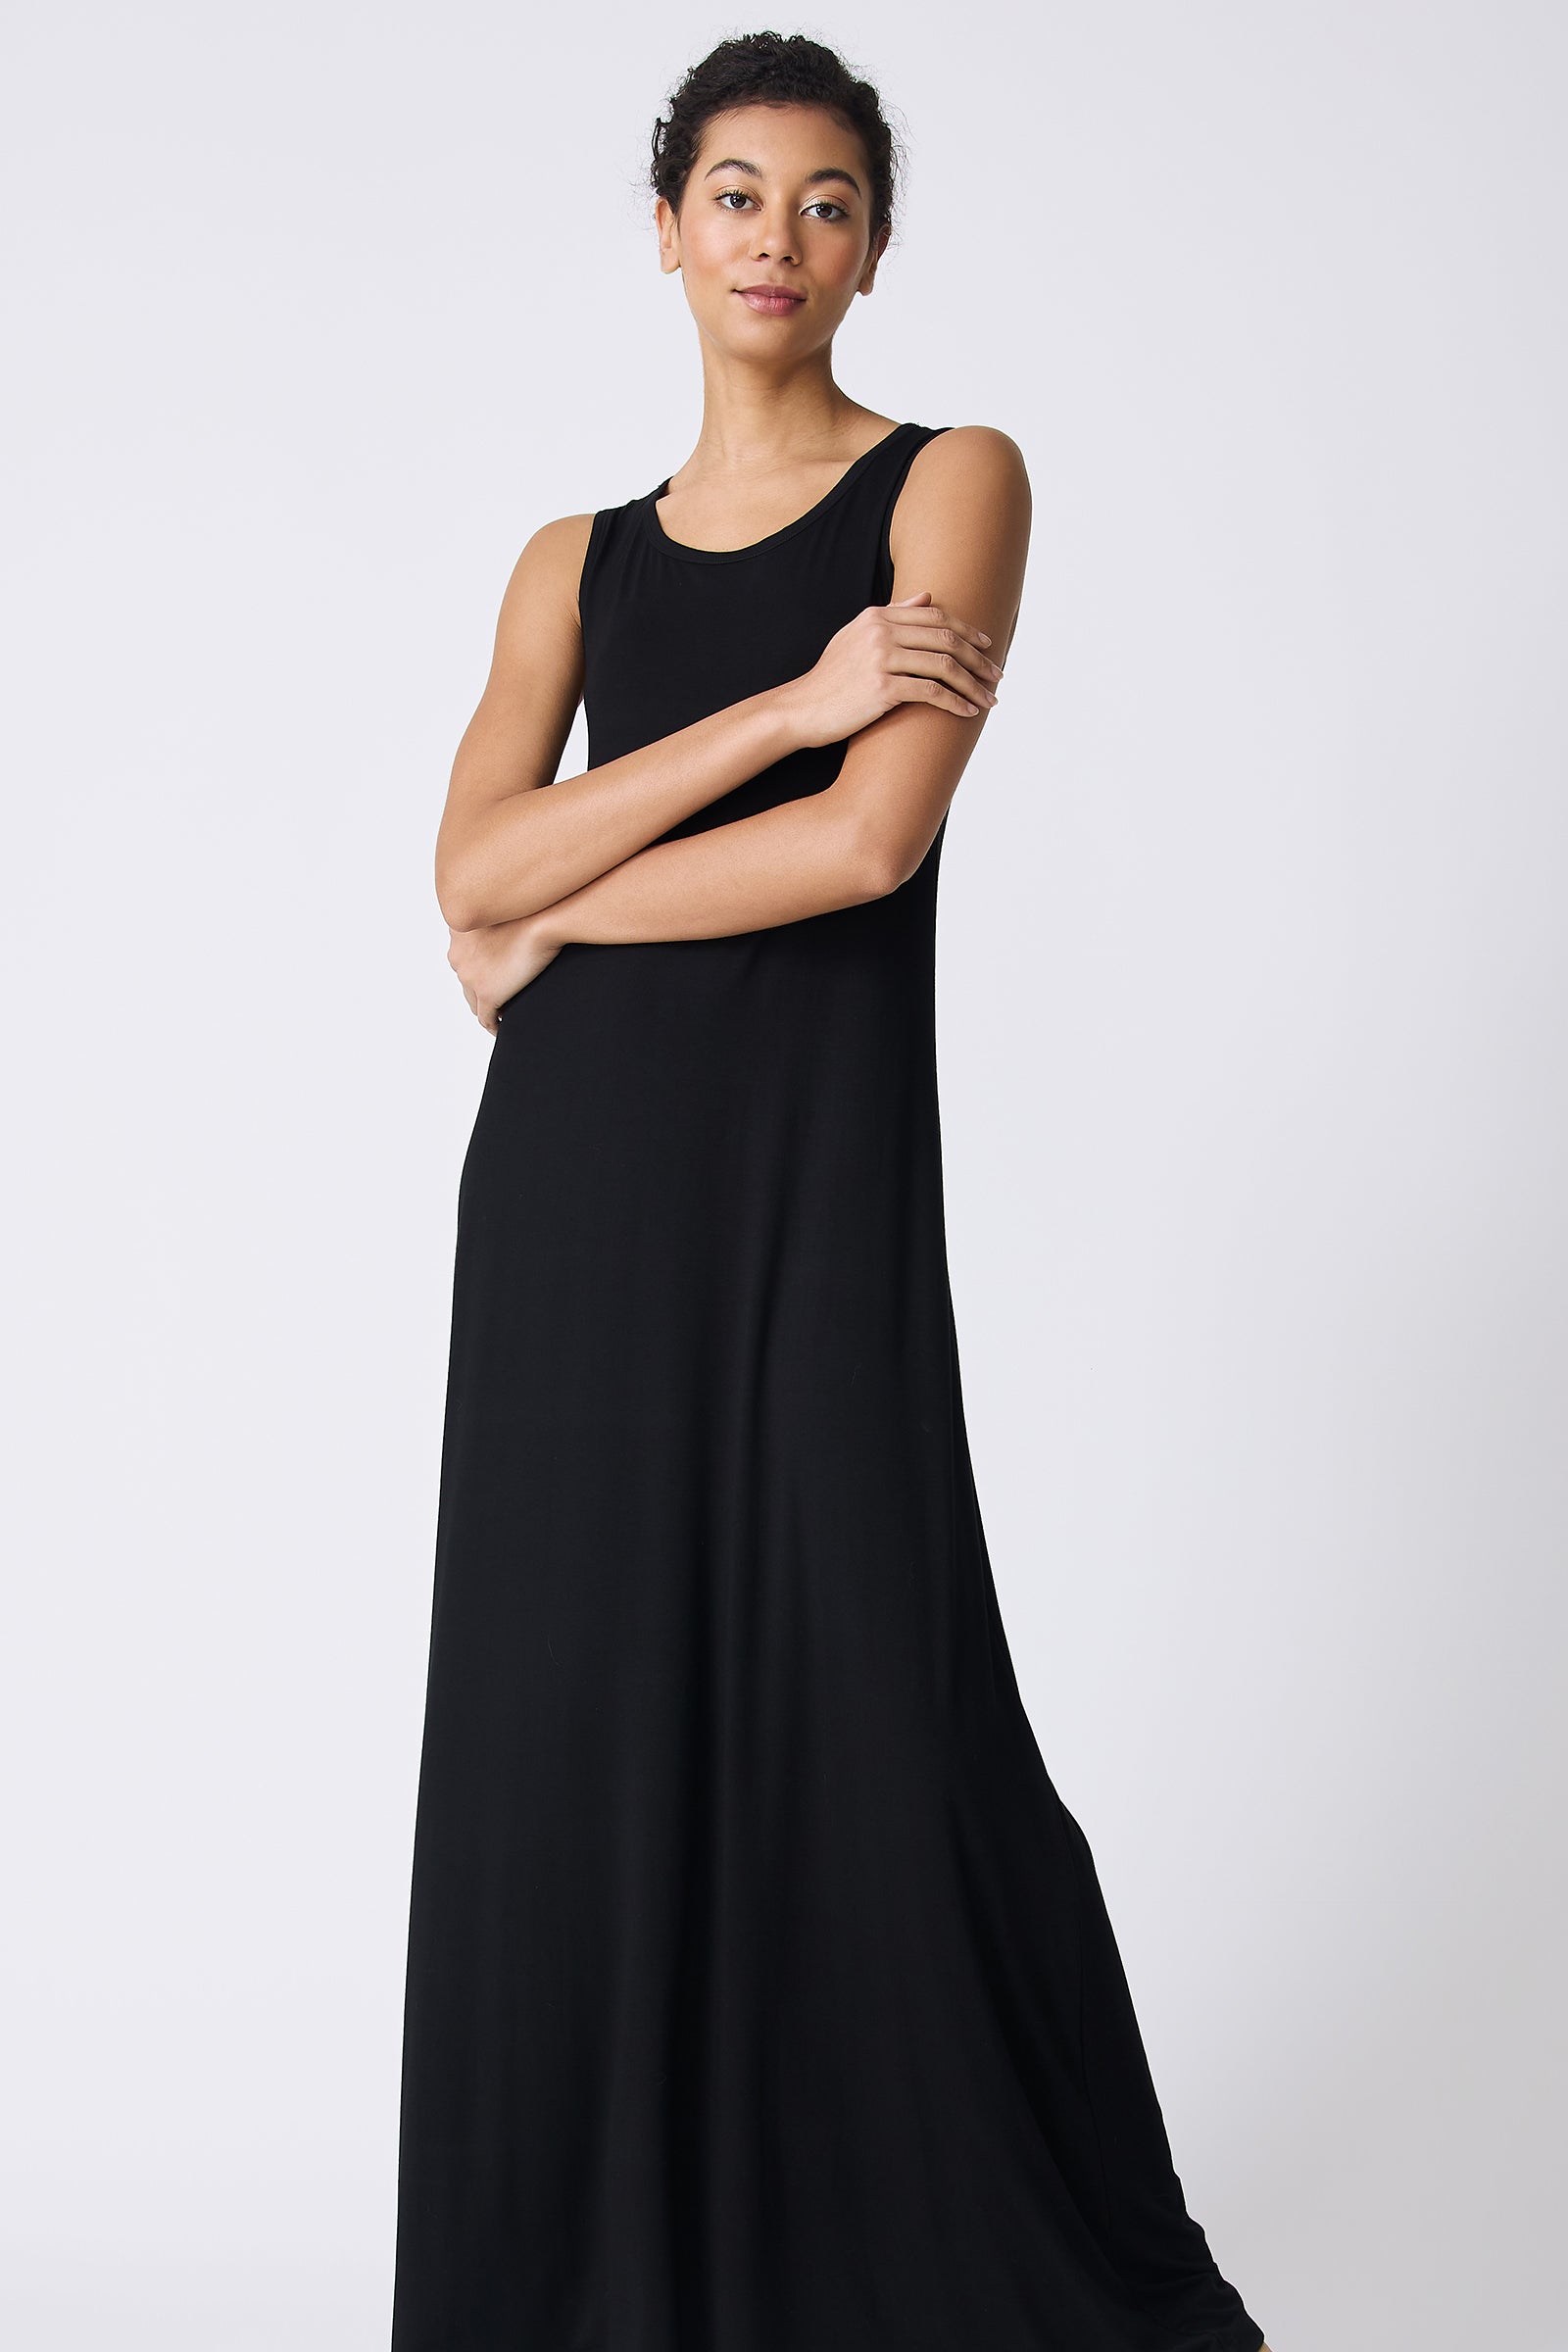 Kal Rieman Sophia Maxi Dress in Black on model with arms crossed front view